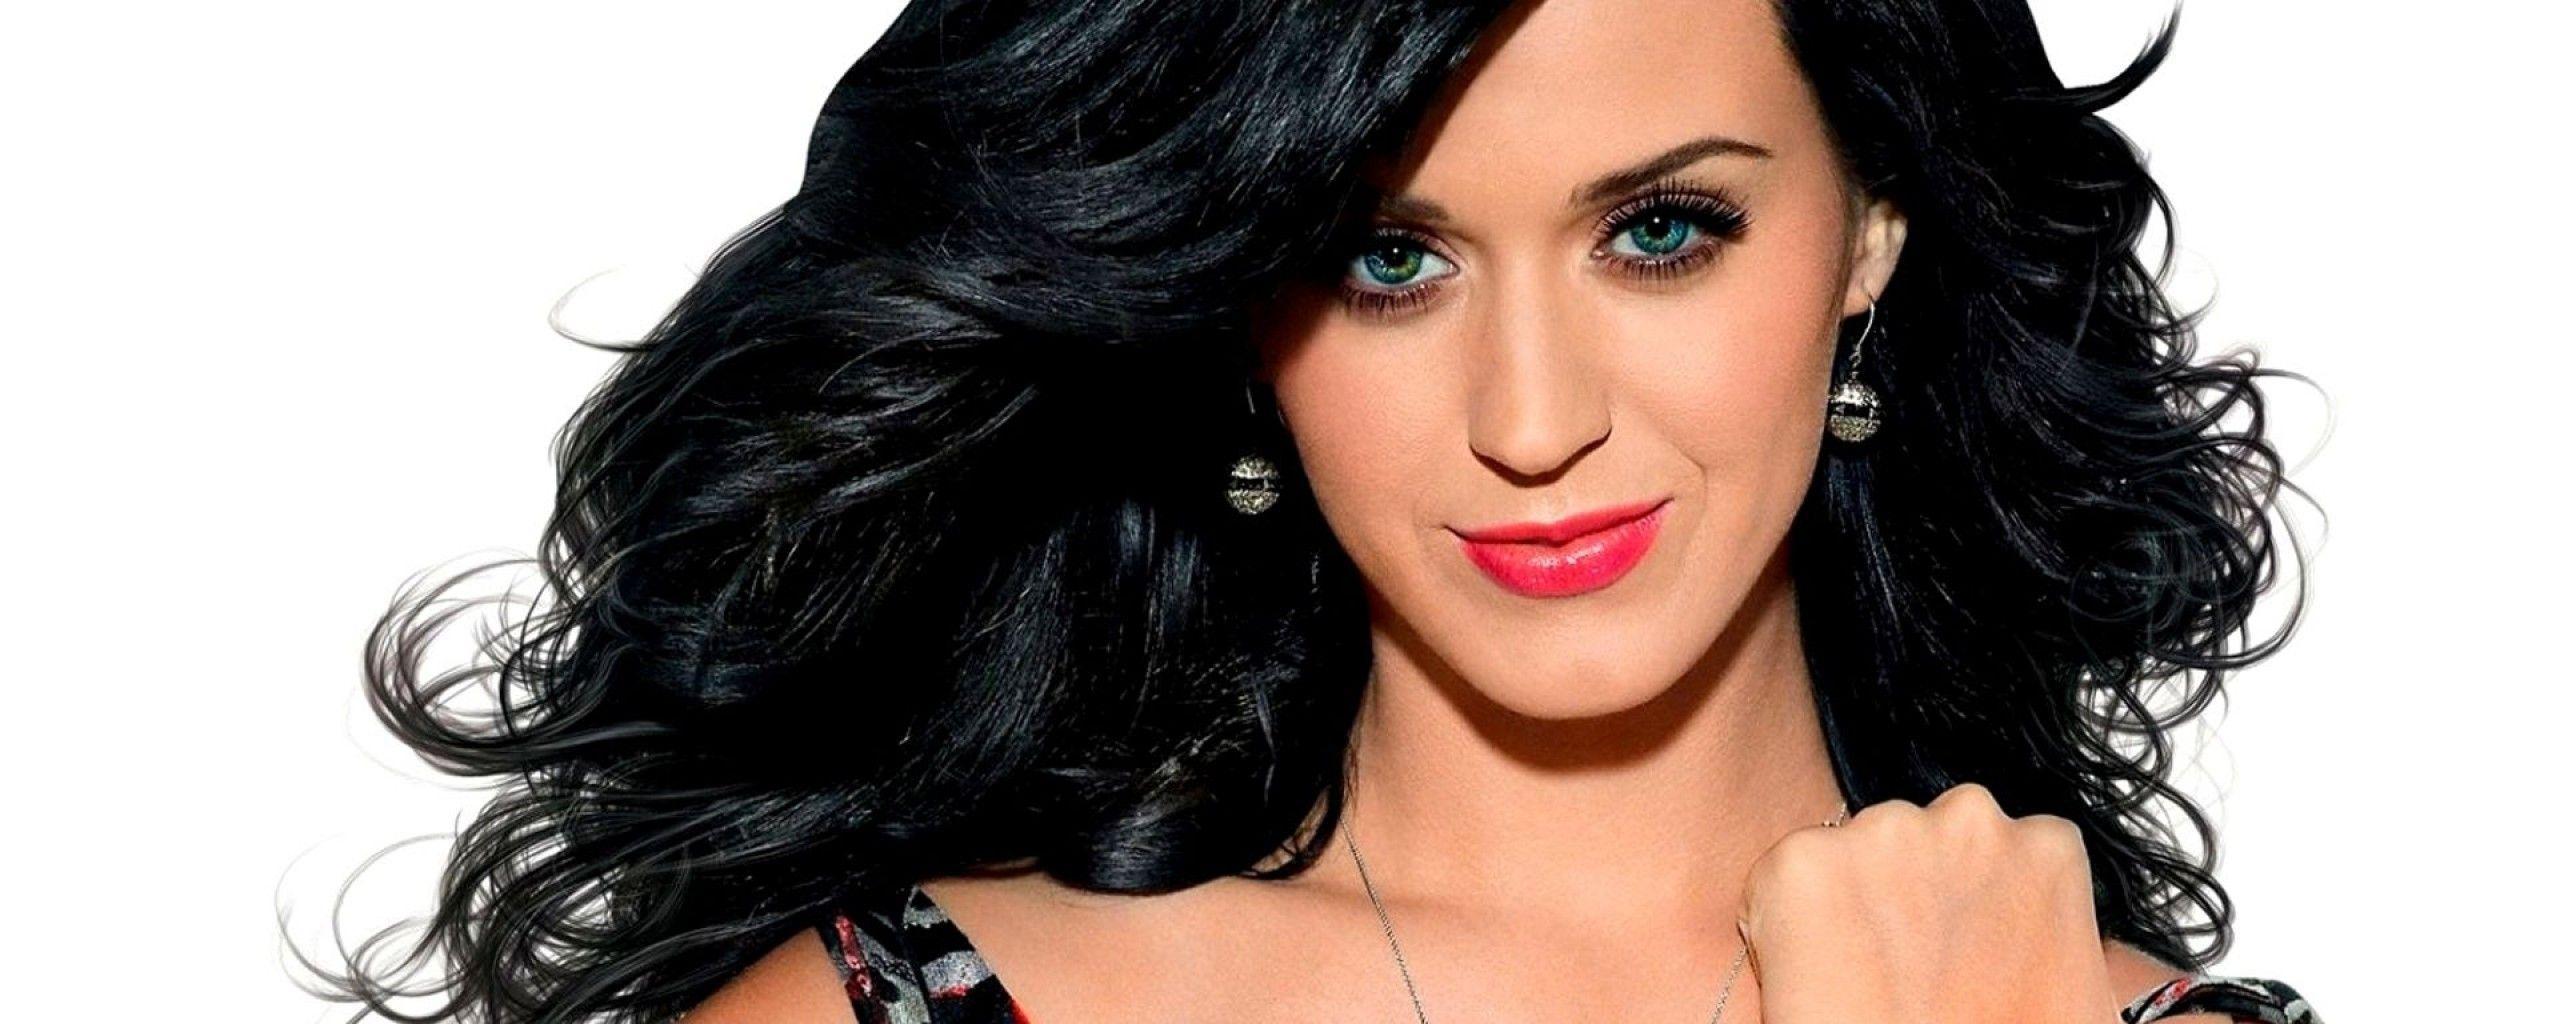 Katy Perry Wallpaper Mobile 8 Katy Perry Wallpaper HD Free